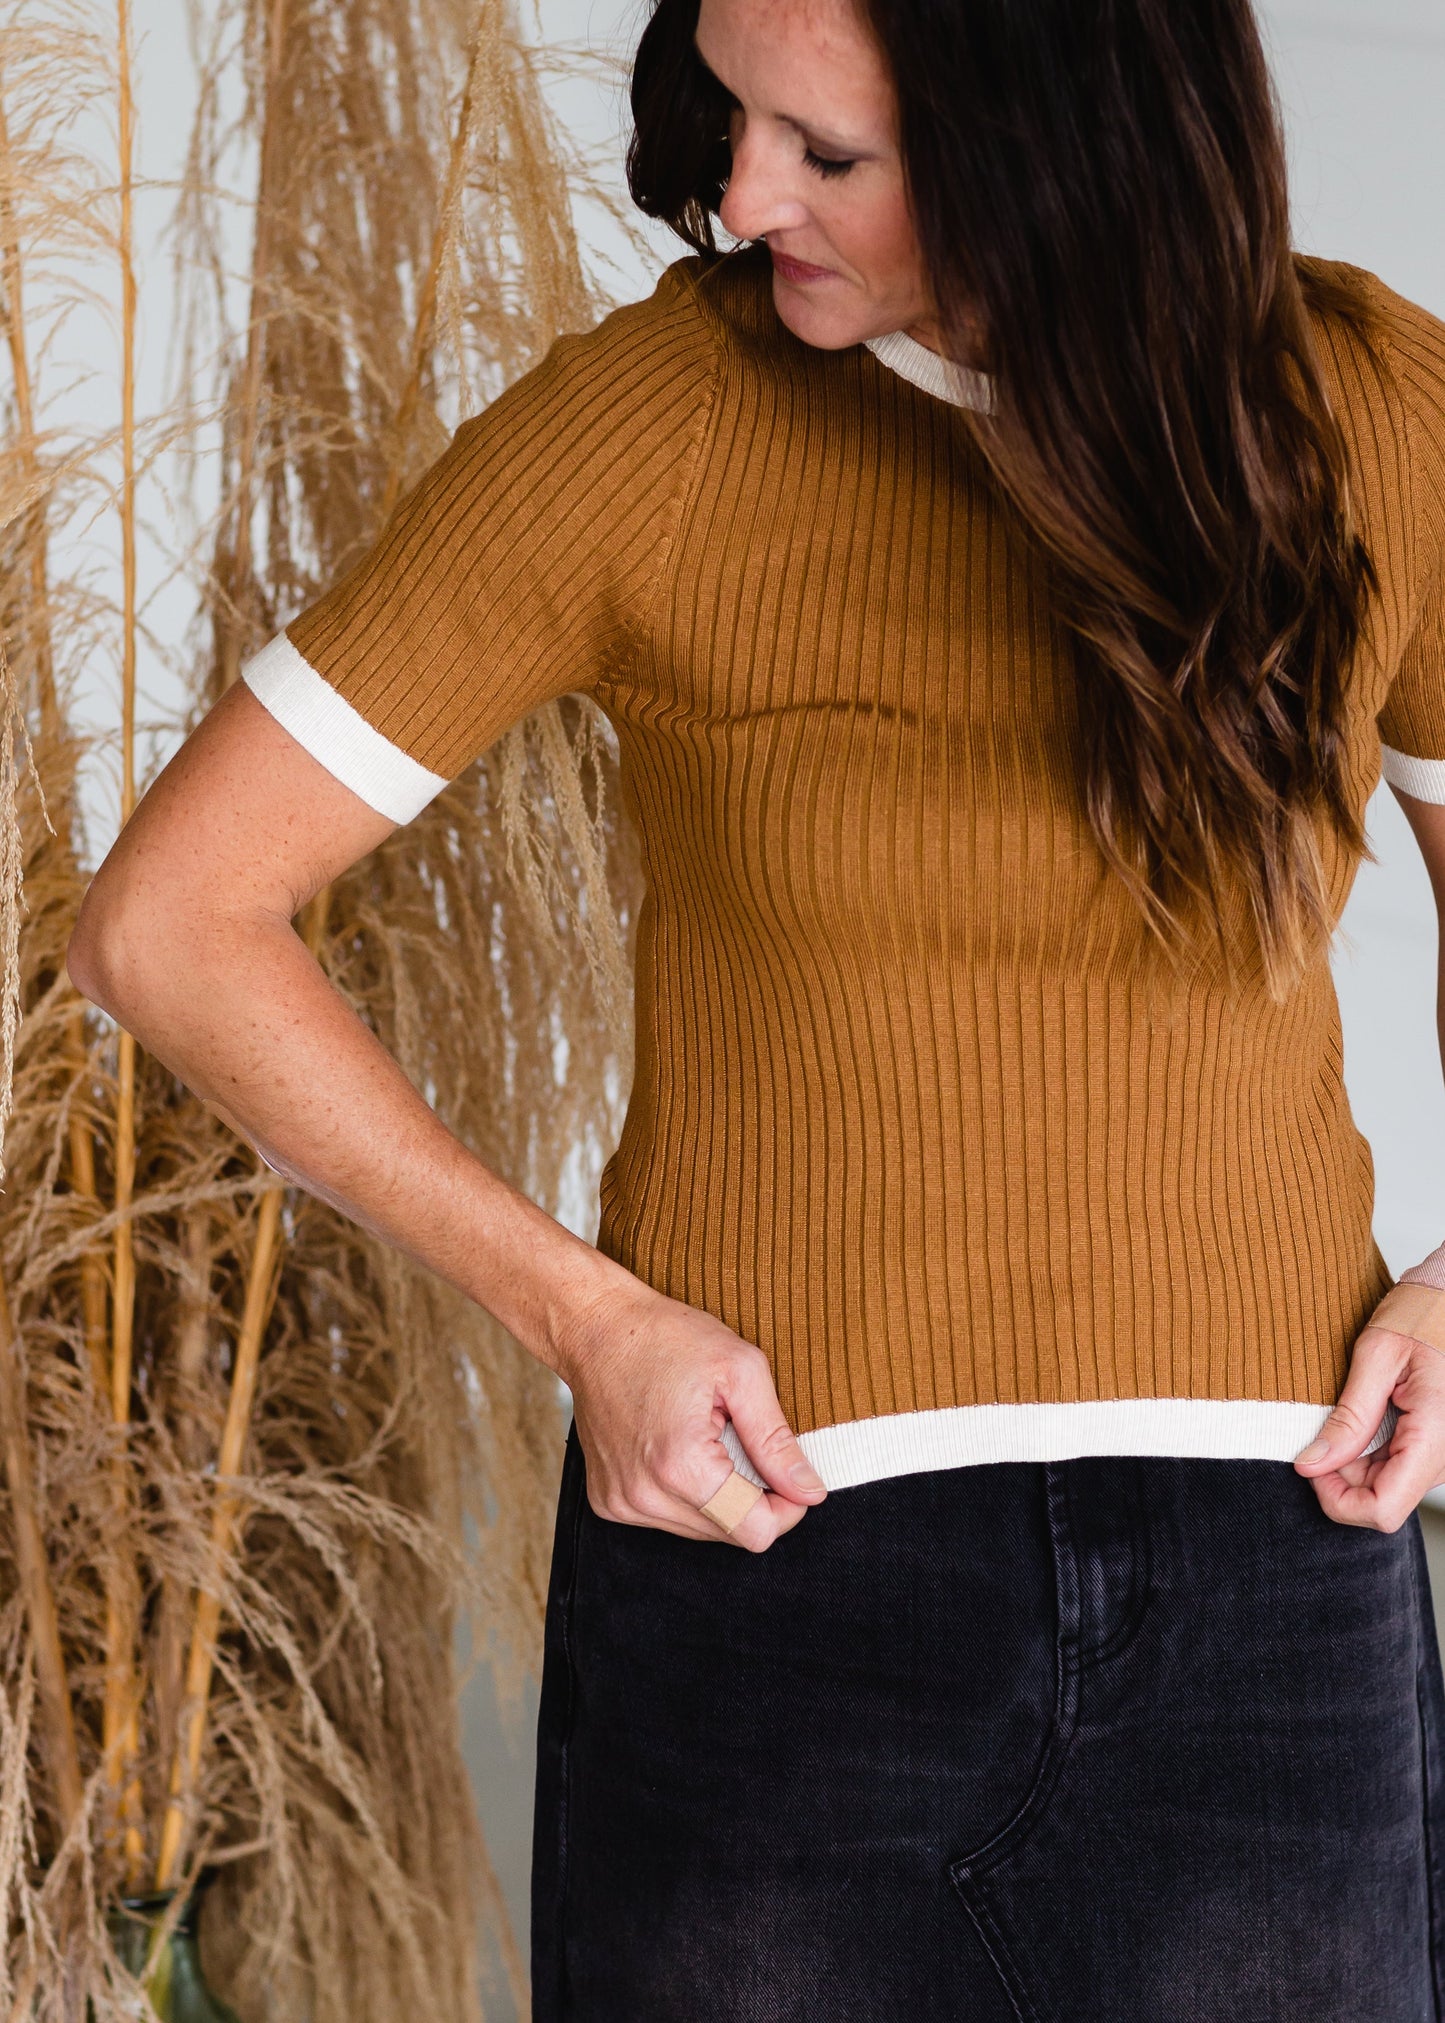 Mustard Contrast Ribbed Knit Top - FINAL SALE Shirt